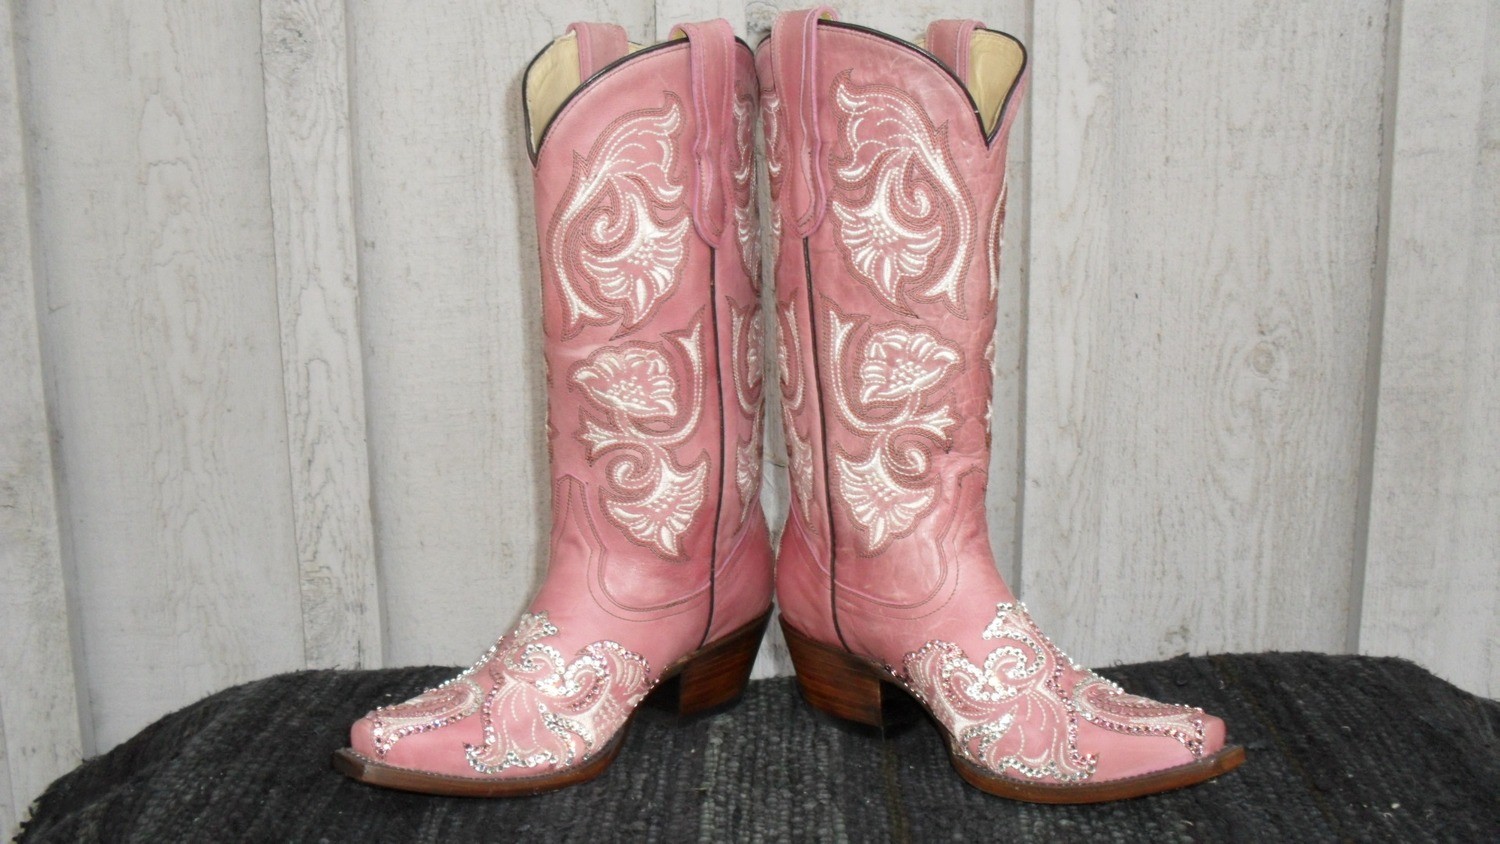 corral boots pink